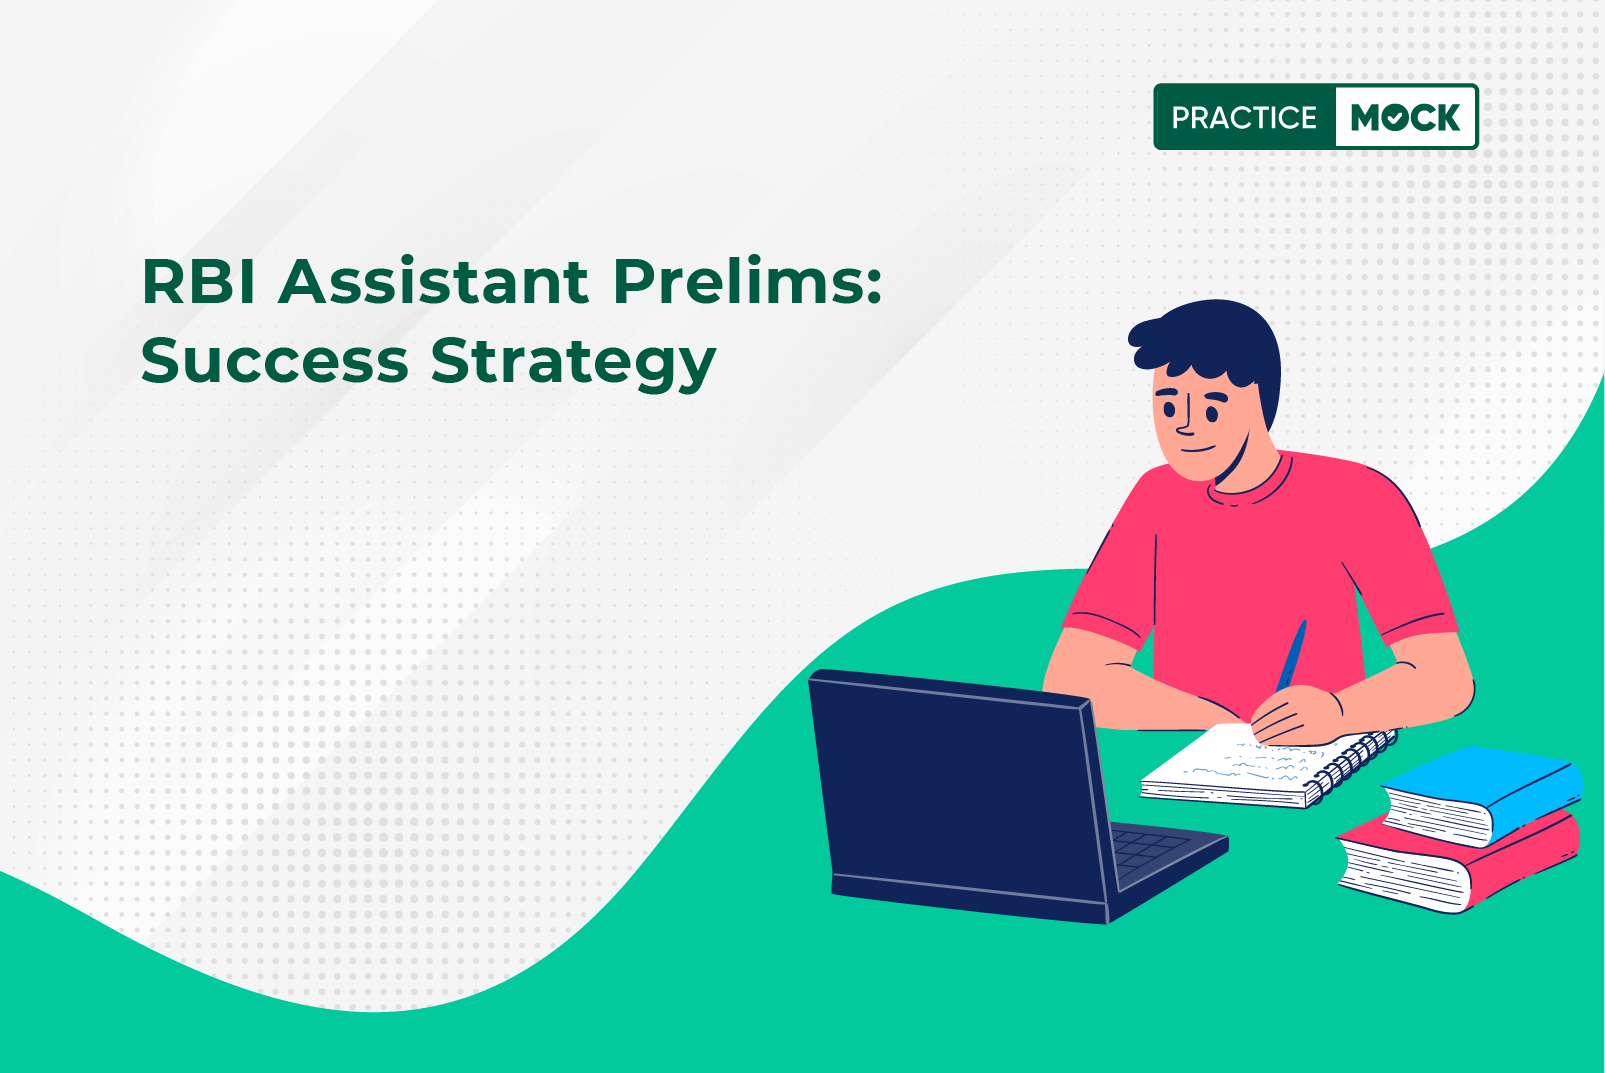 RBI Assistant Prelims- Success Strategy (2)